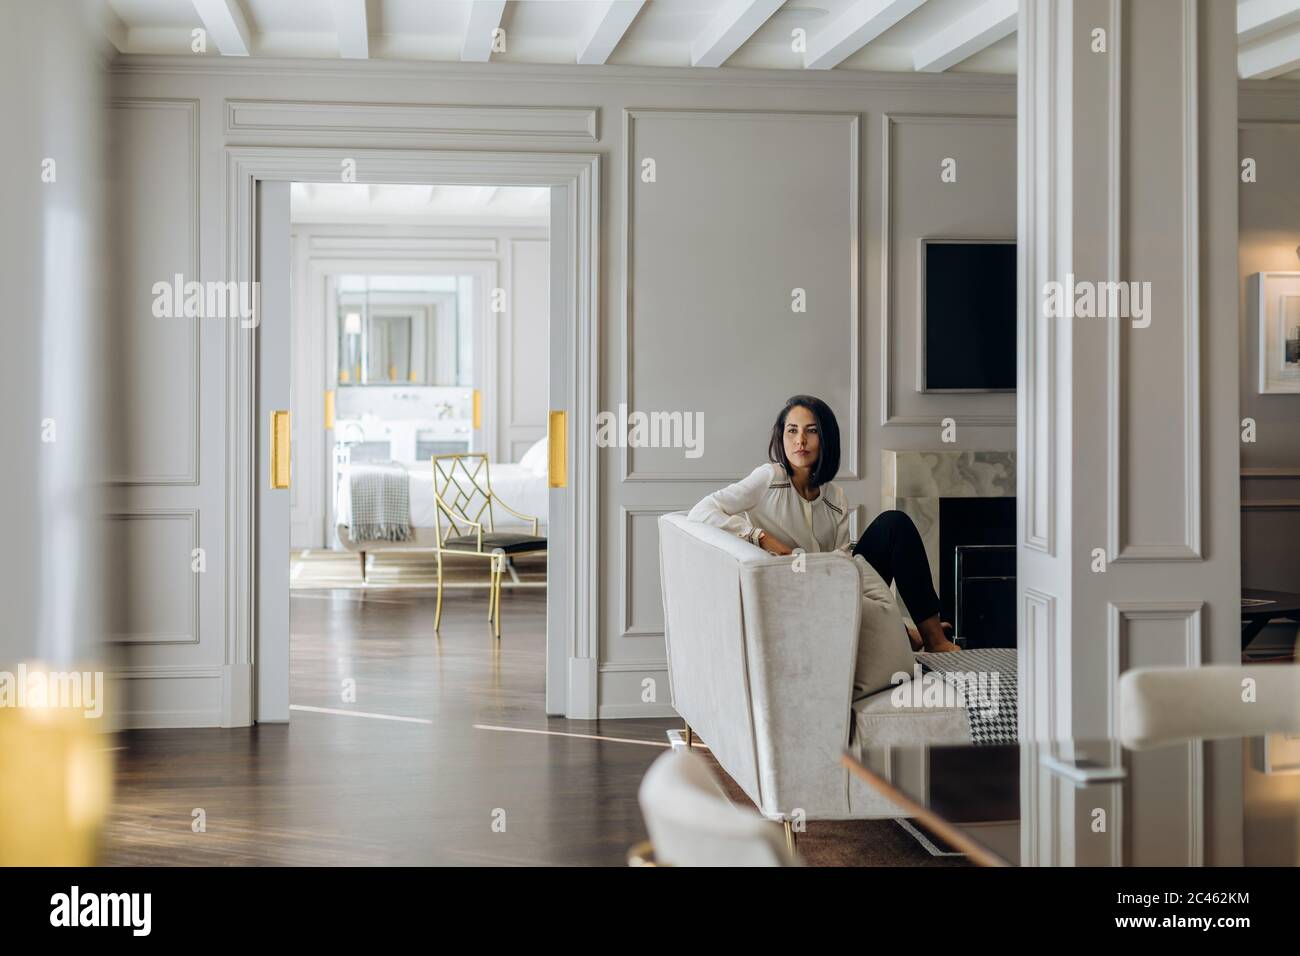 Businesswoman deep in thoughts in suite Stock Photo